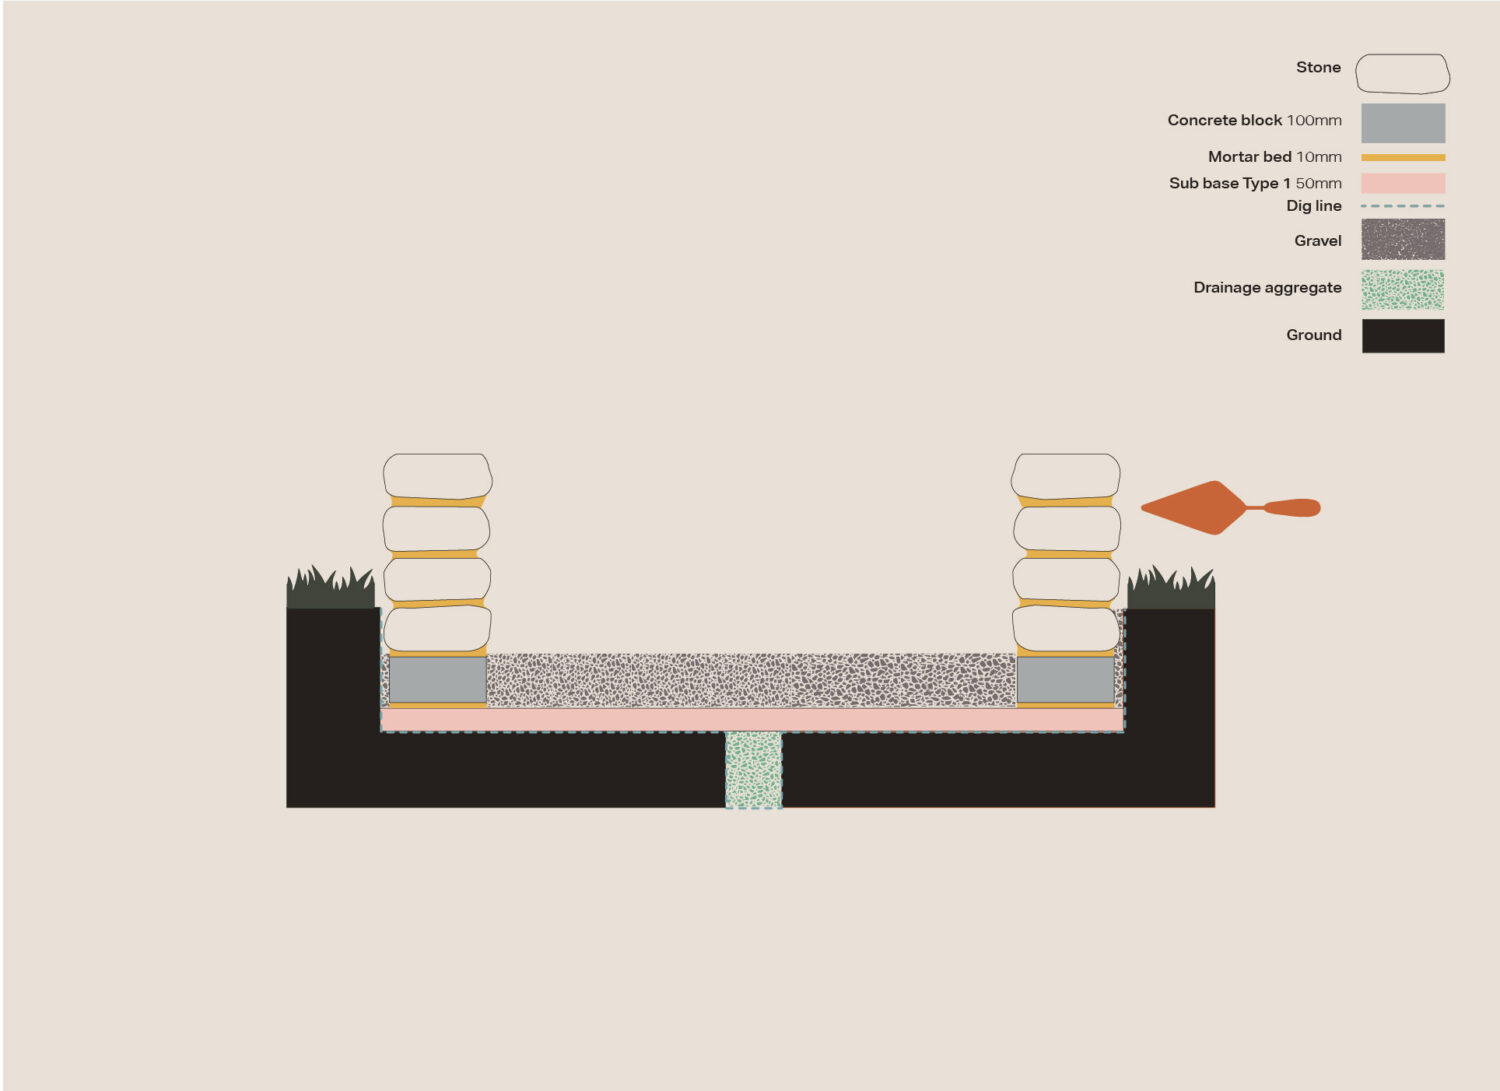 cross section graphic illustration of built stone firepit